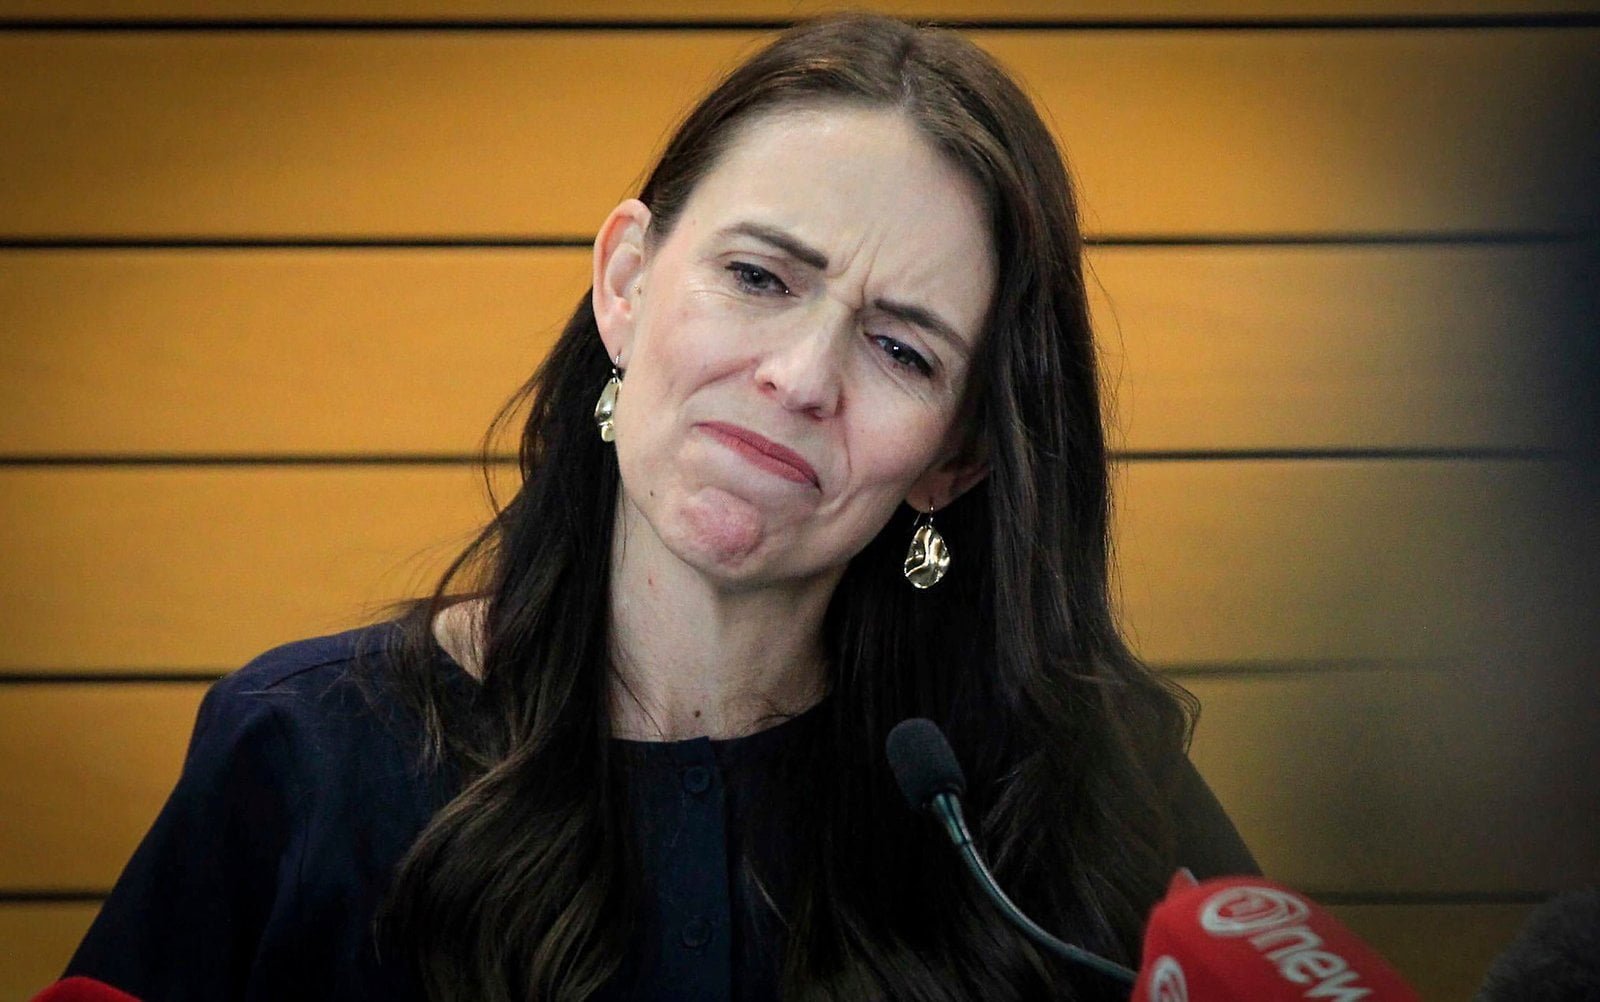 jacinda-ardern-resigns-as-prime-minister-of-new-zealand